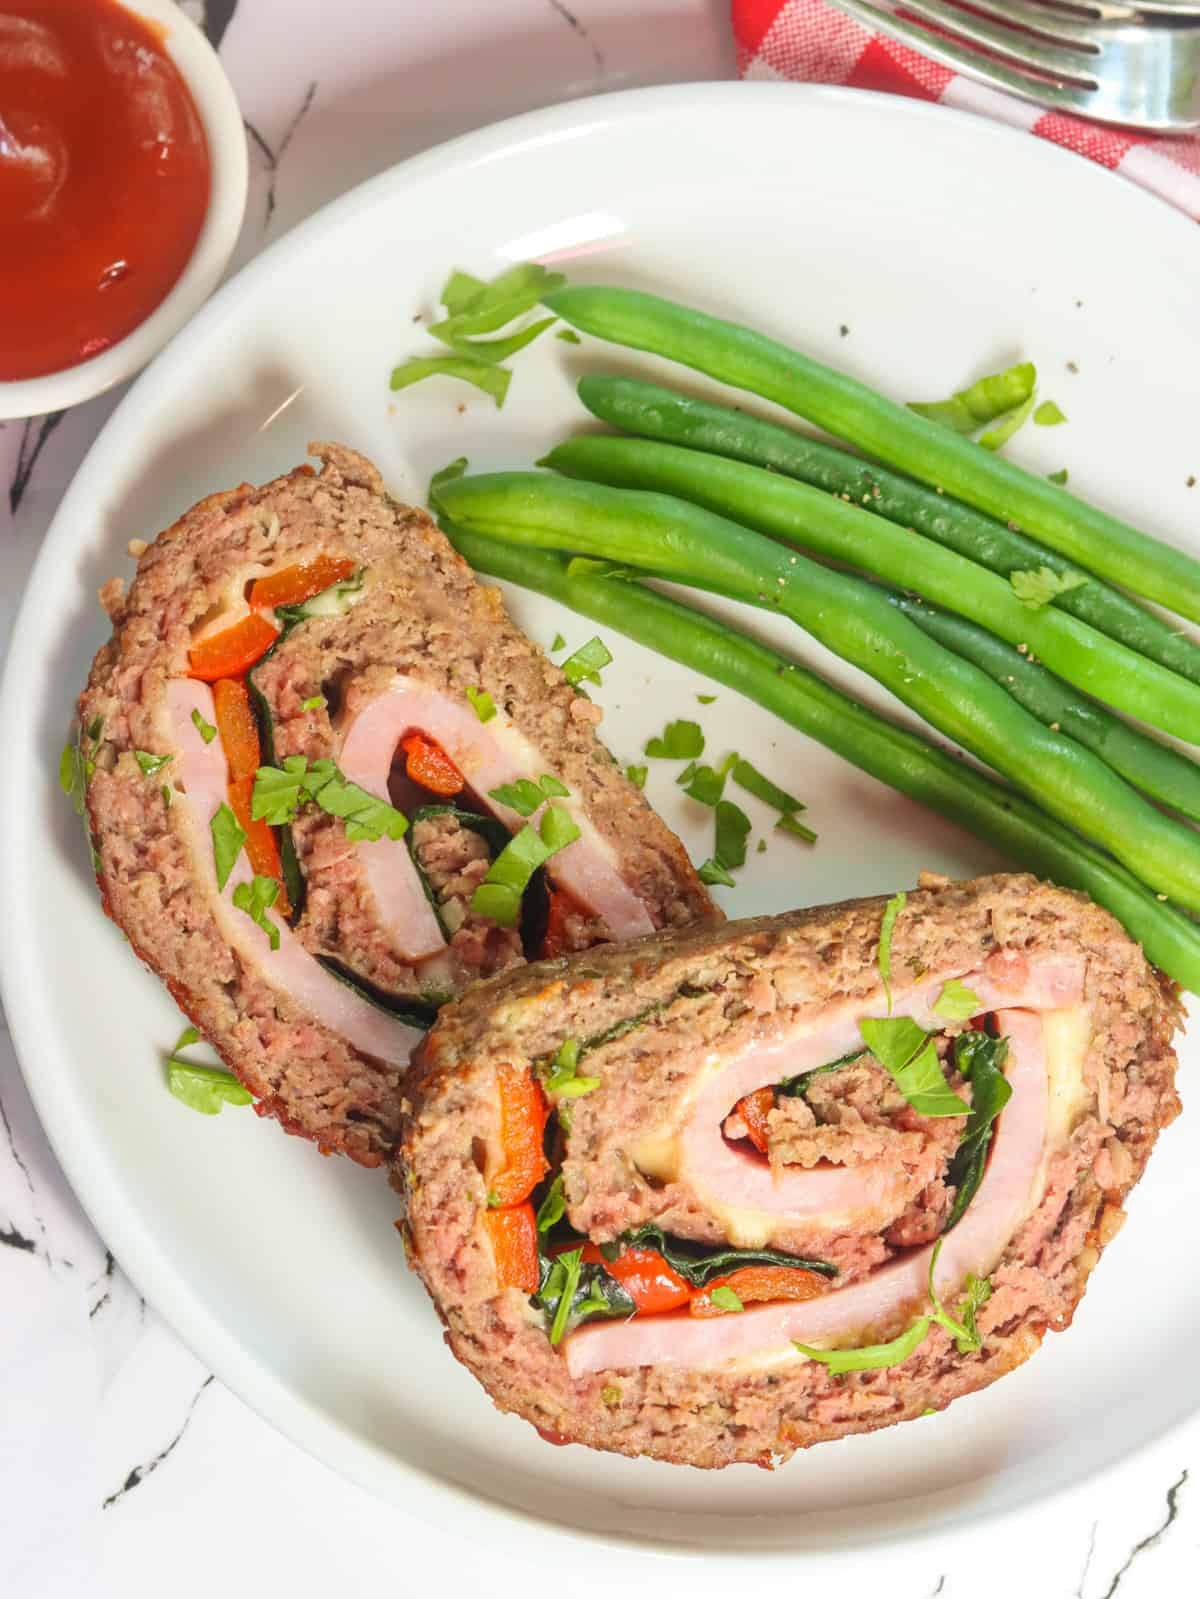 Enjoy meatloaf stuffed with roasted beans